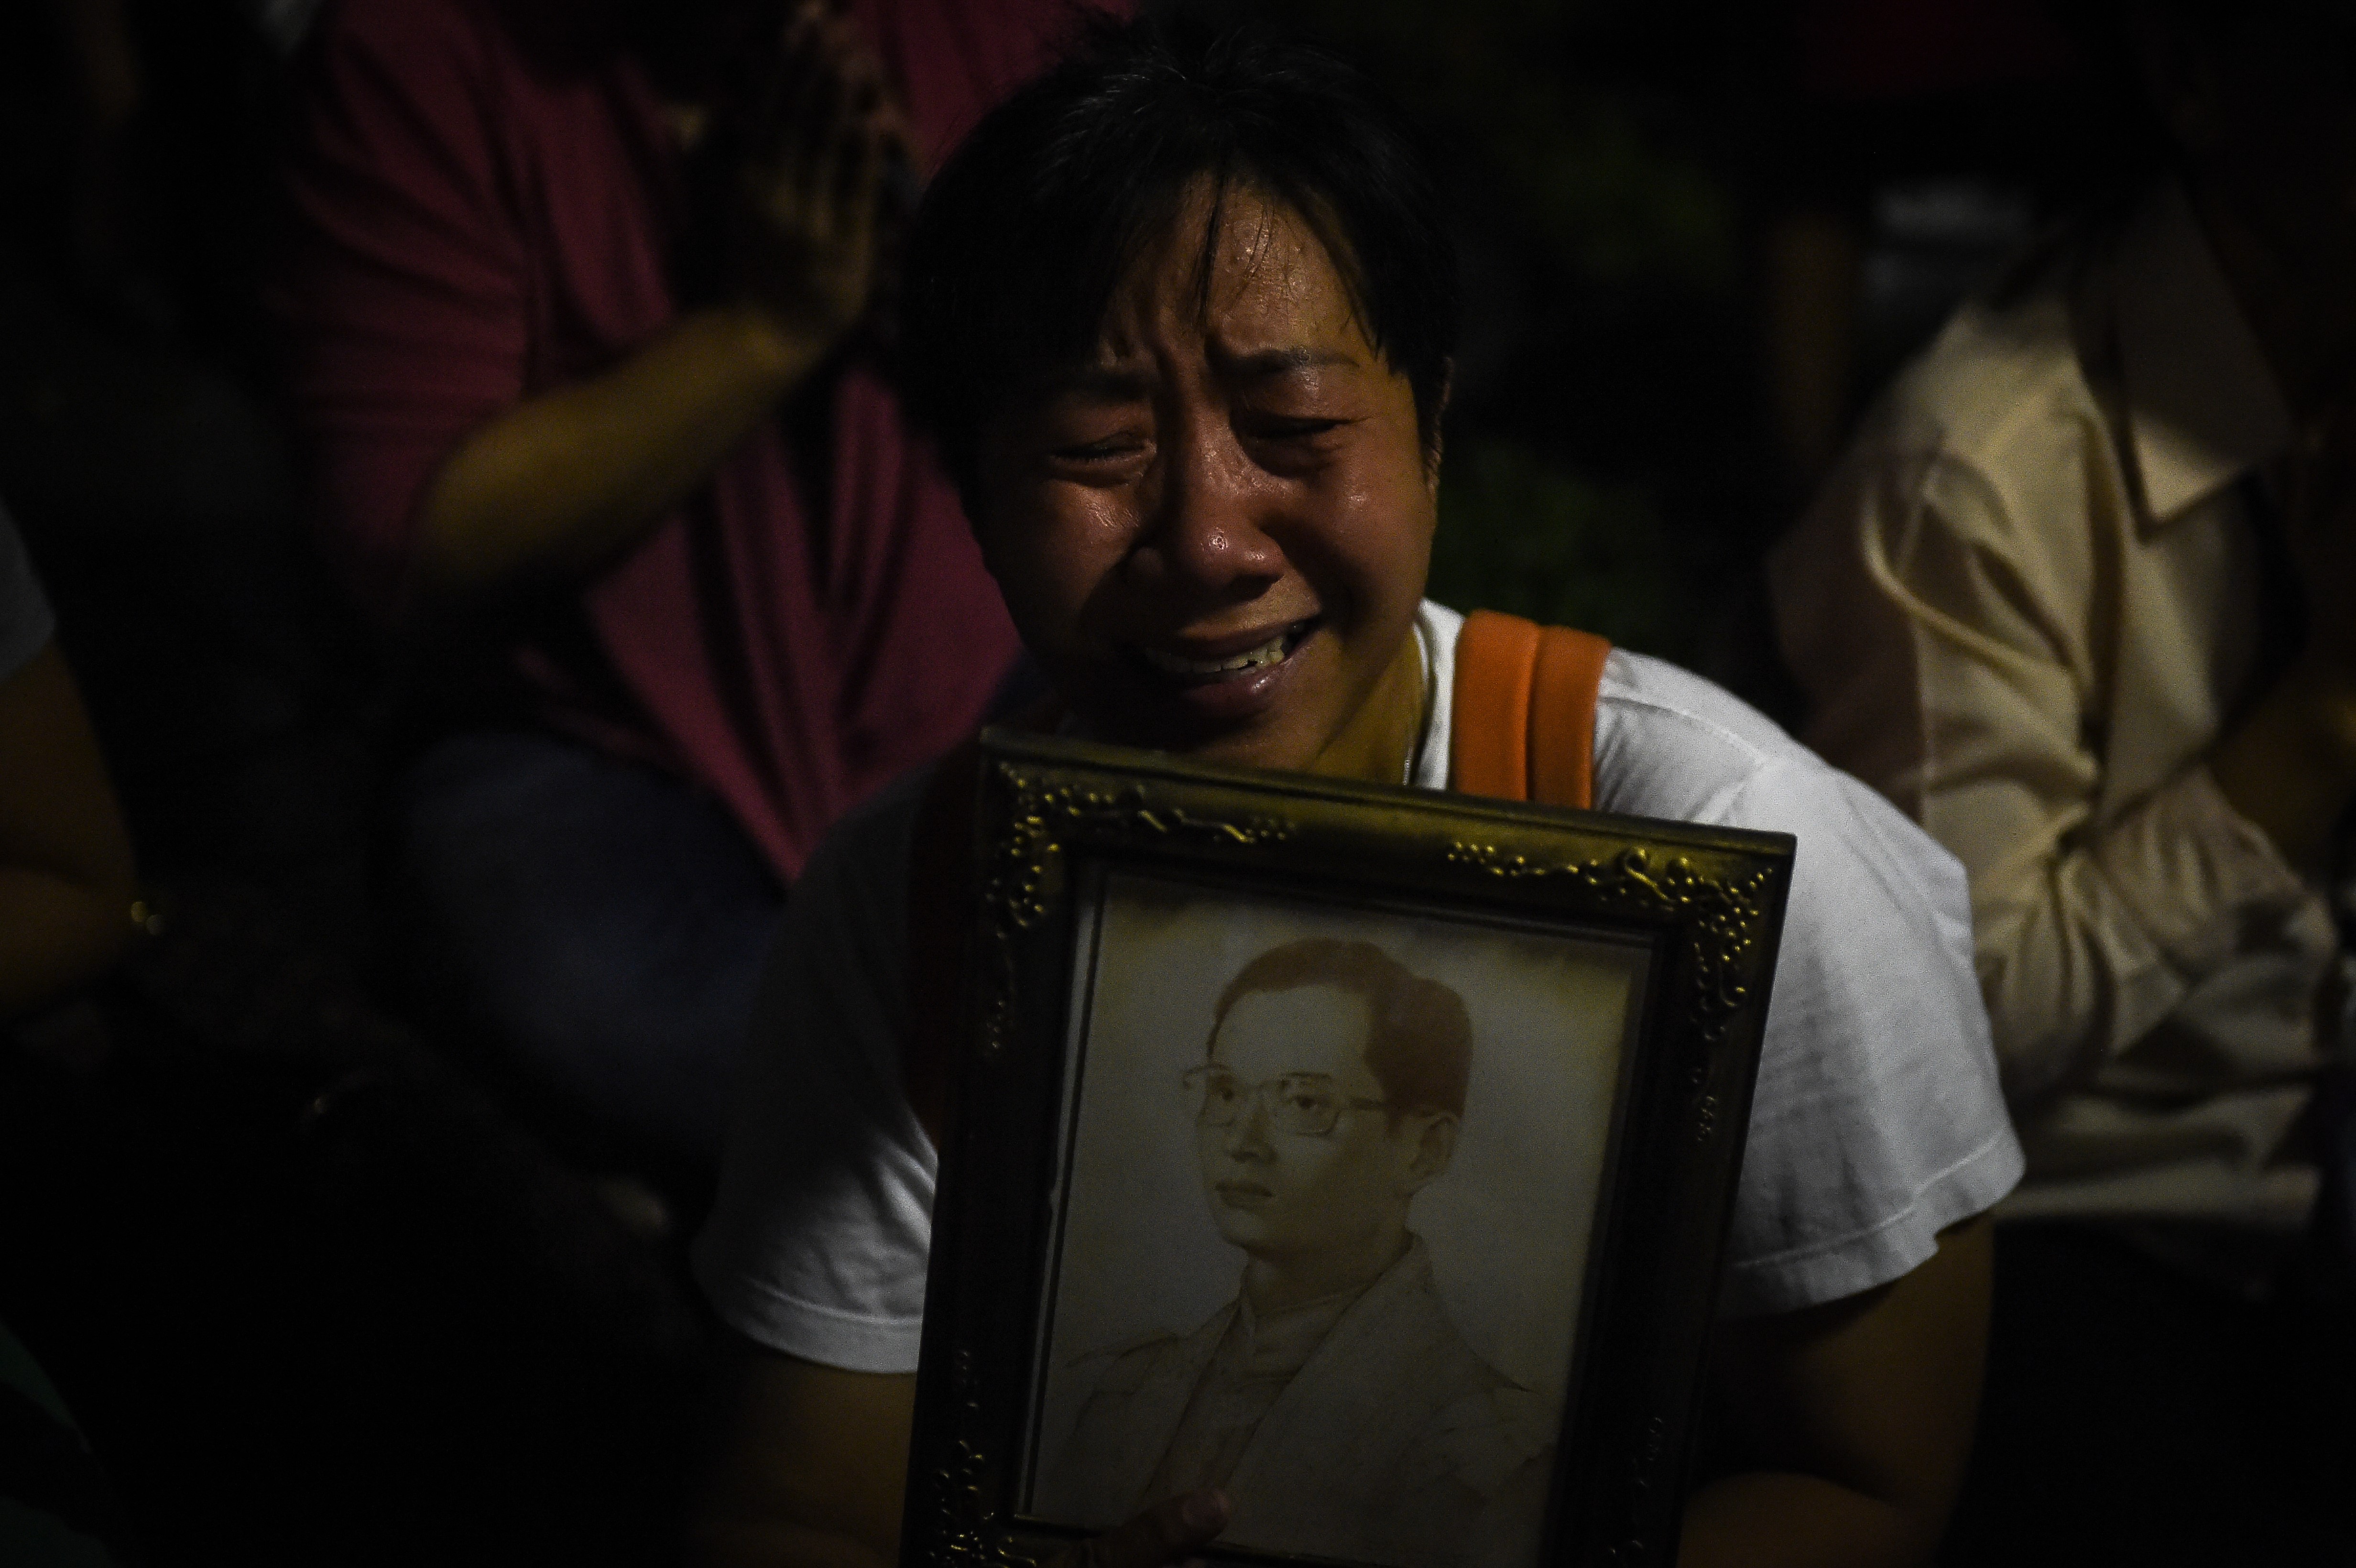 People react to the death of Thailand's King Bhumibol Adulyadej at Siriraj Hospital in Bangkok on October 13, 2016. Thailand's King Bhumibol Adulyadej has died after a long illness, the palace announced on October 13, 2016, ending a remarkable seven-decade reign and leaving a divided people bereft of a towering and rare figure of unity. / AFP PHOTO / LILLIAN SUWANRUMPHA